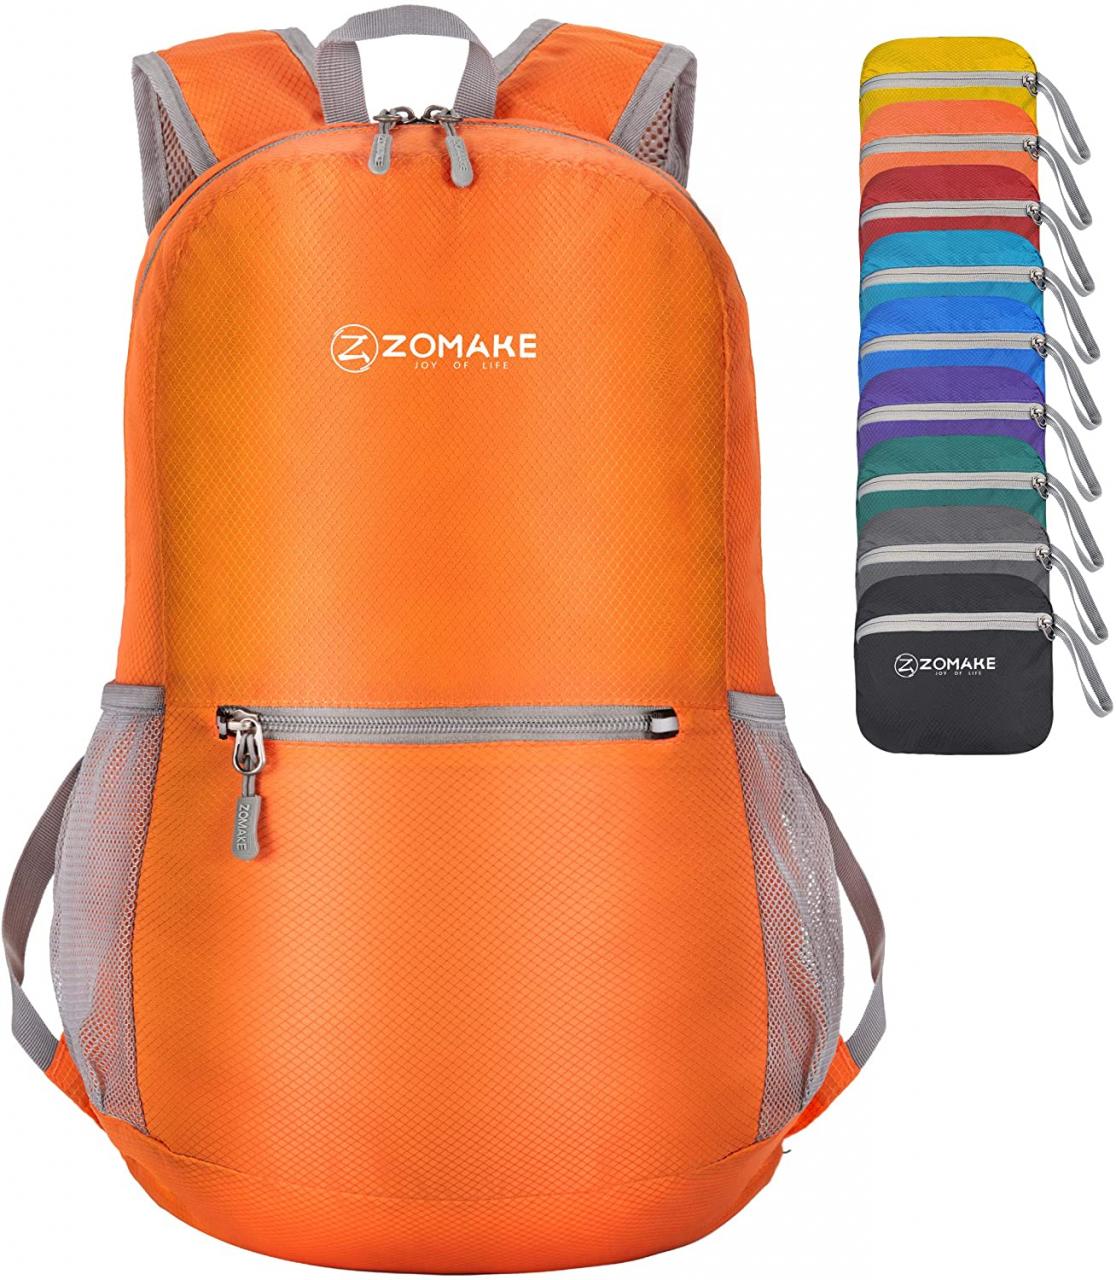 Buy ZOMAKE Ultra Lightweight Hiking Backpack - Water Resistant Small Backpack  Packable Daypack for Women Men Online in Hong Kong. B01A1YCU7U